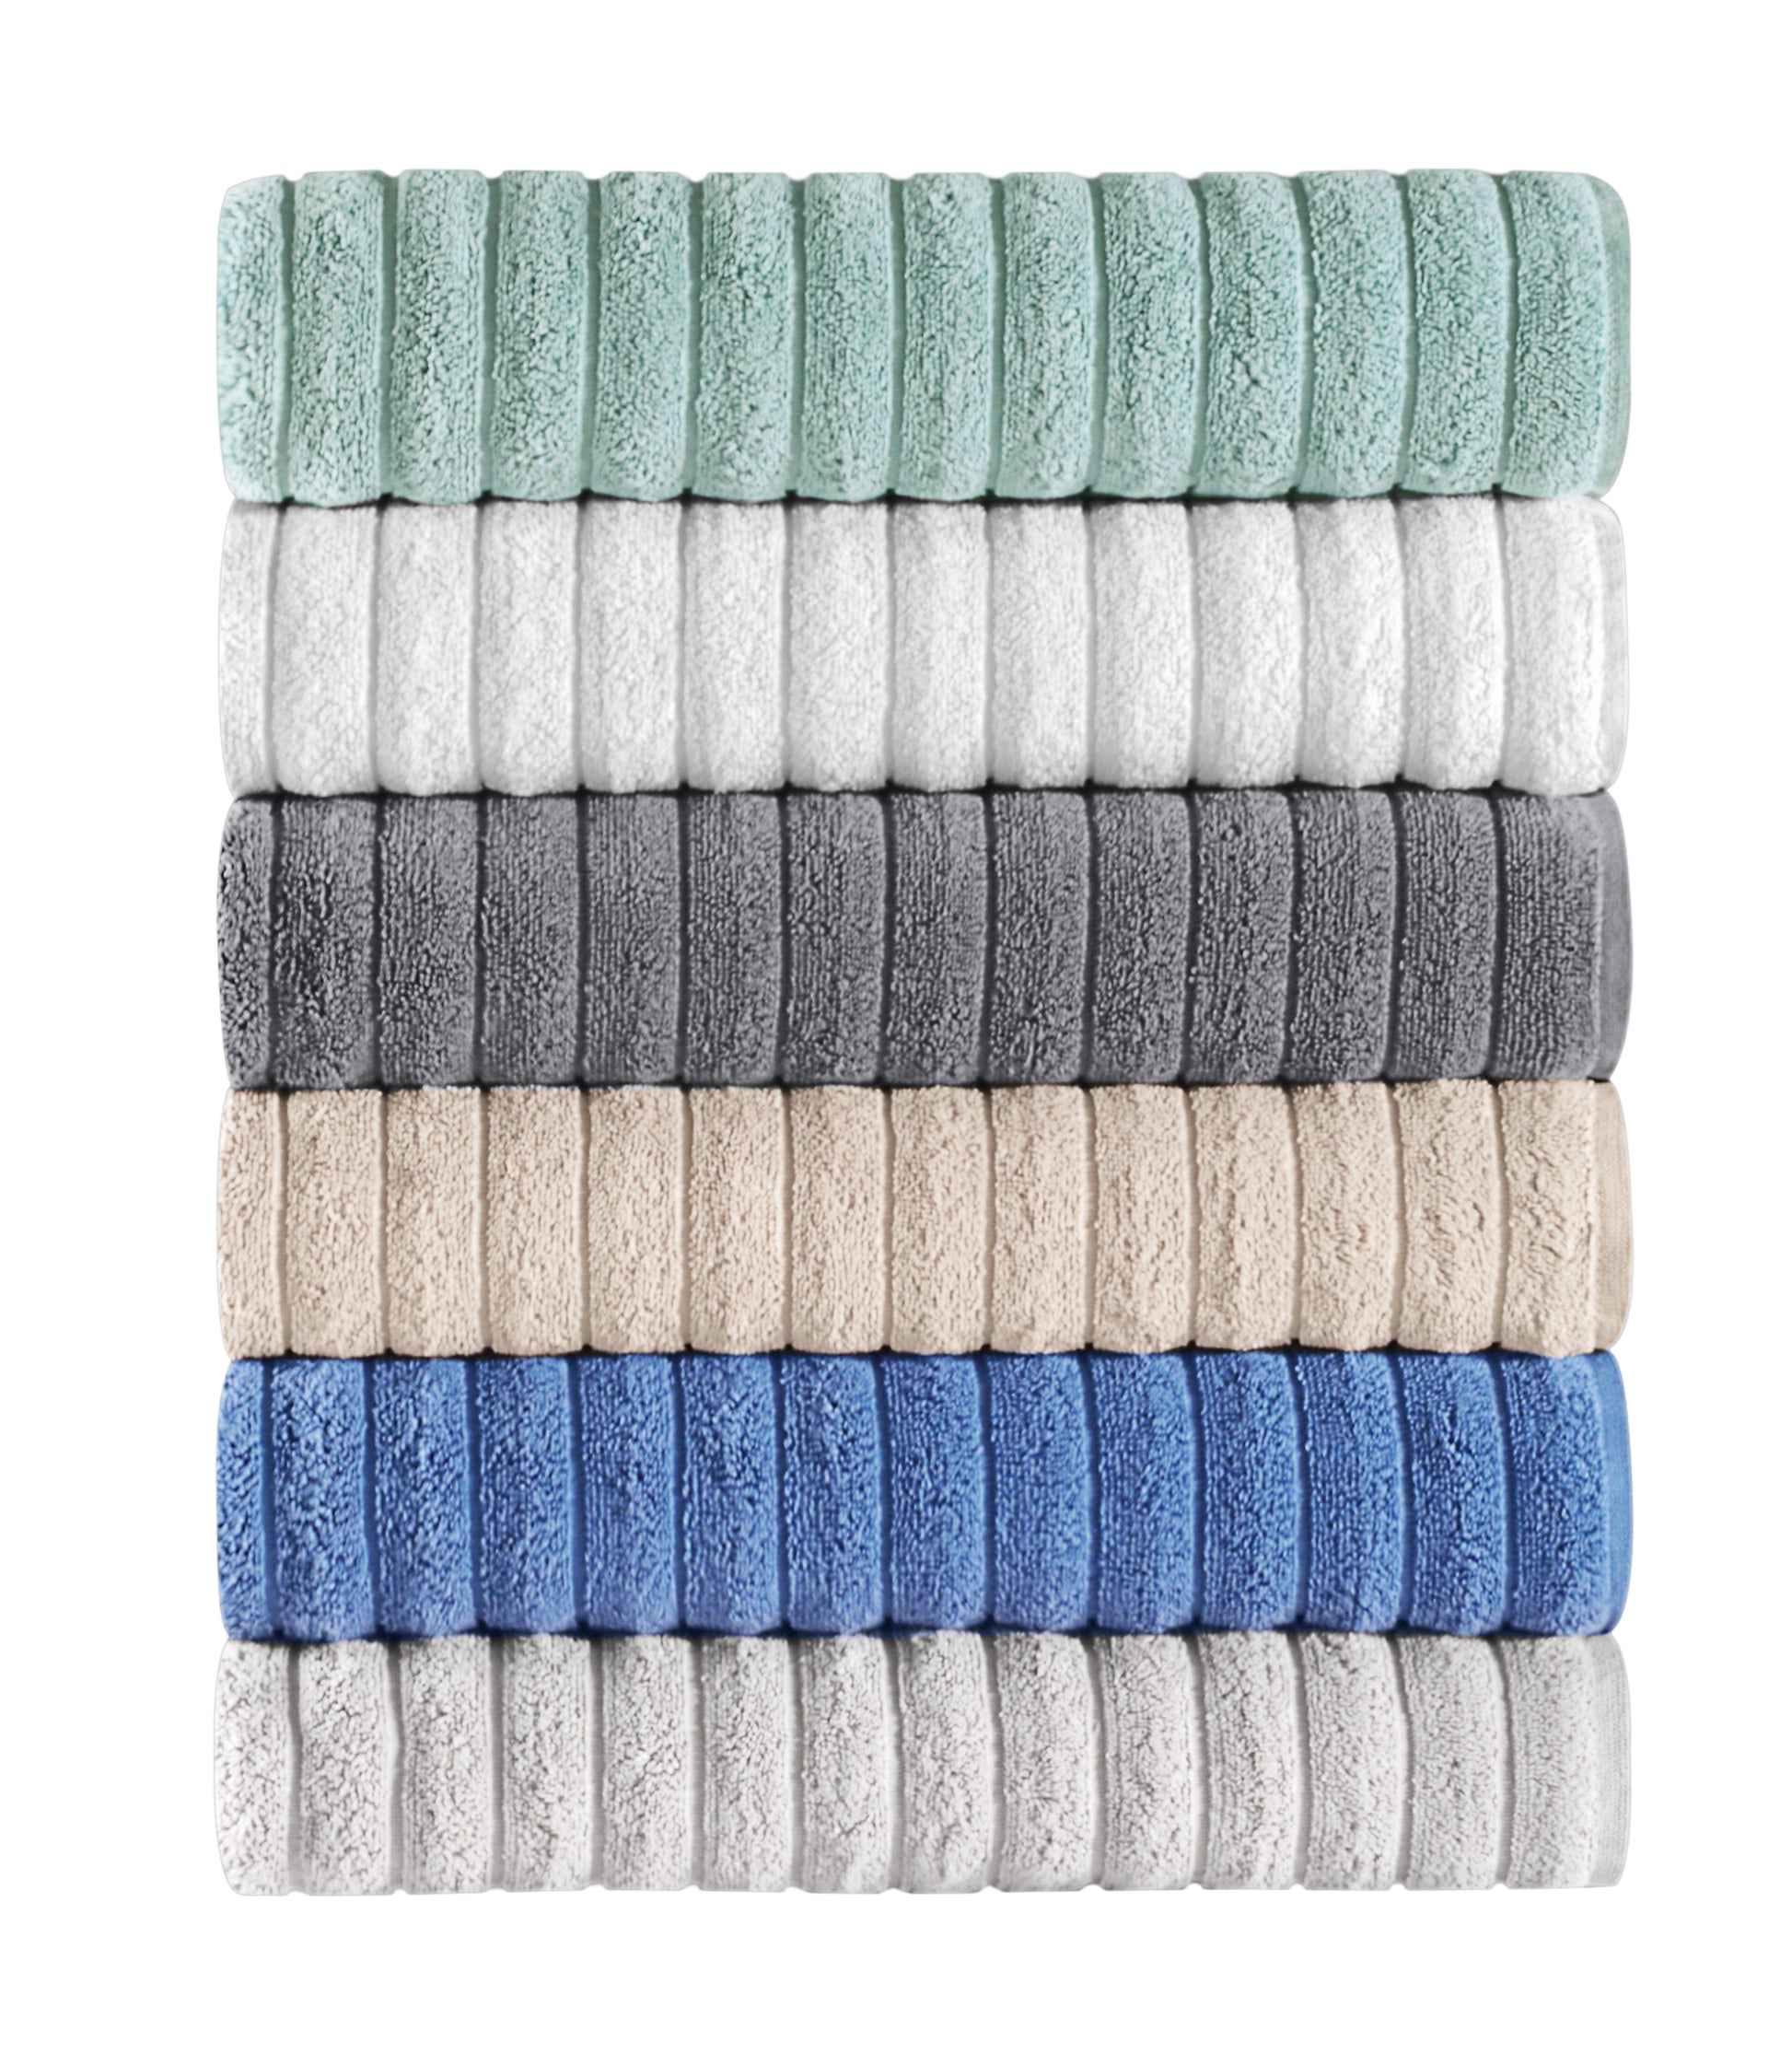 Classic Turkish Towels - 13x13 Inches 6-Pieces Luxury Ribbed Jacquard  Washcloths - Quick Dry, Soft and Absorbent Face Wash Towels, Brampton  Collection